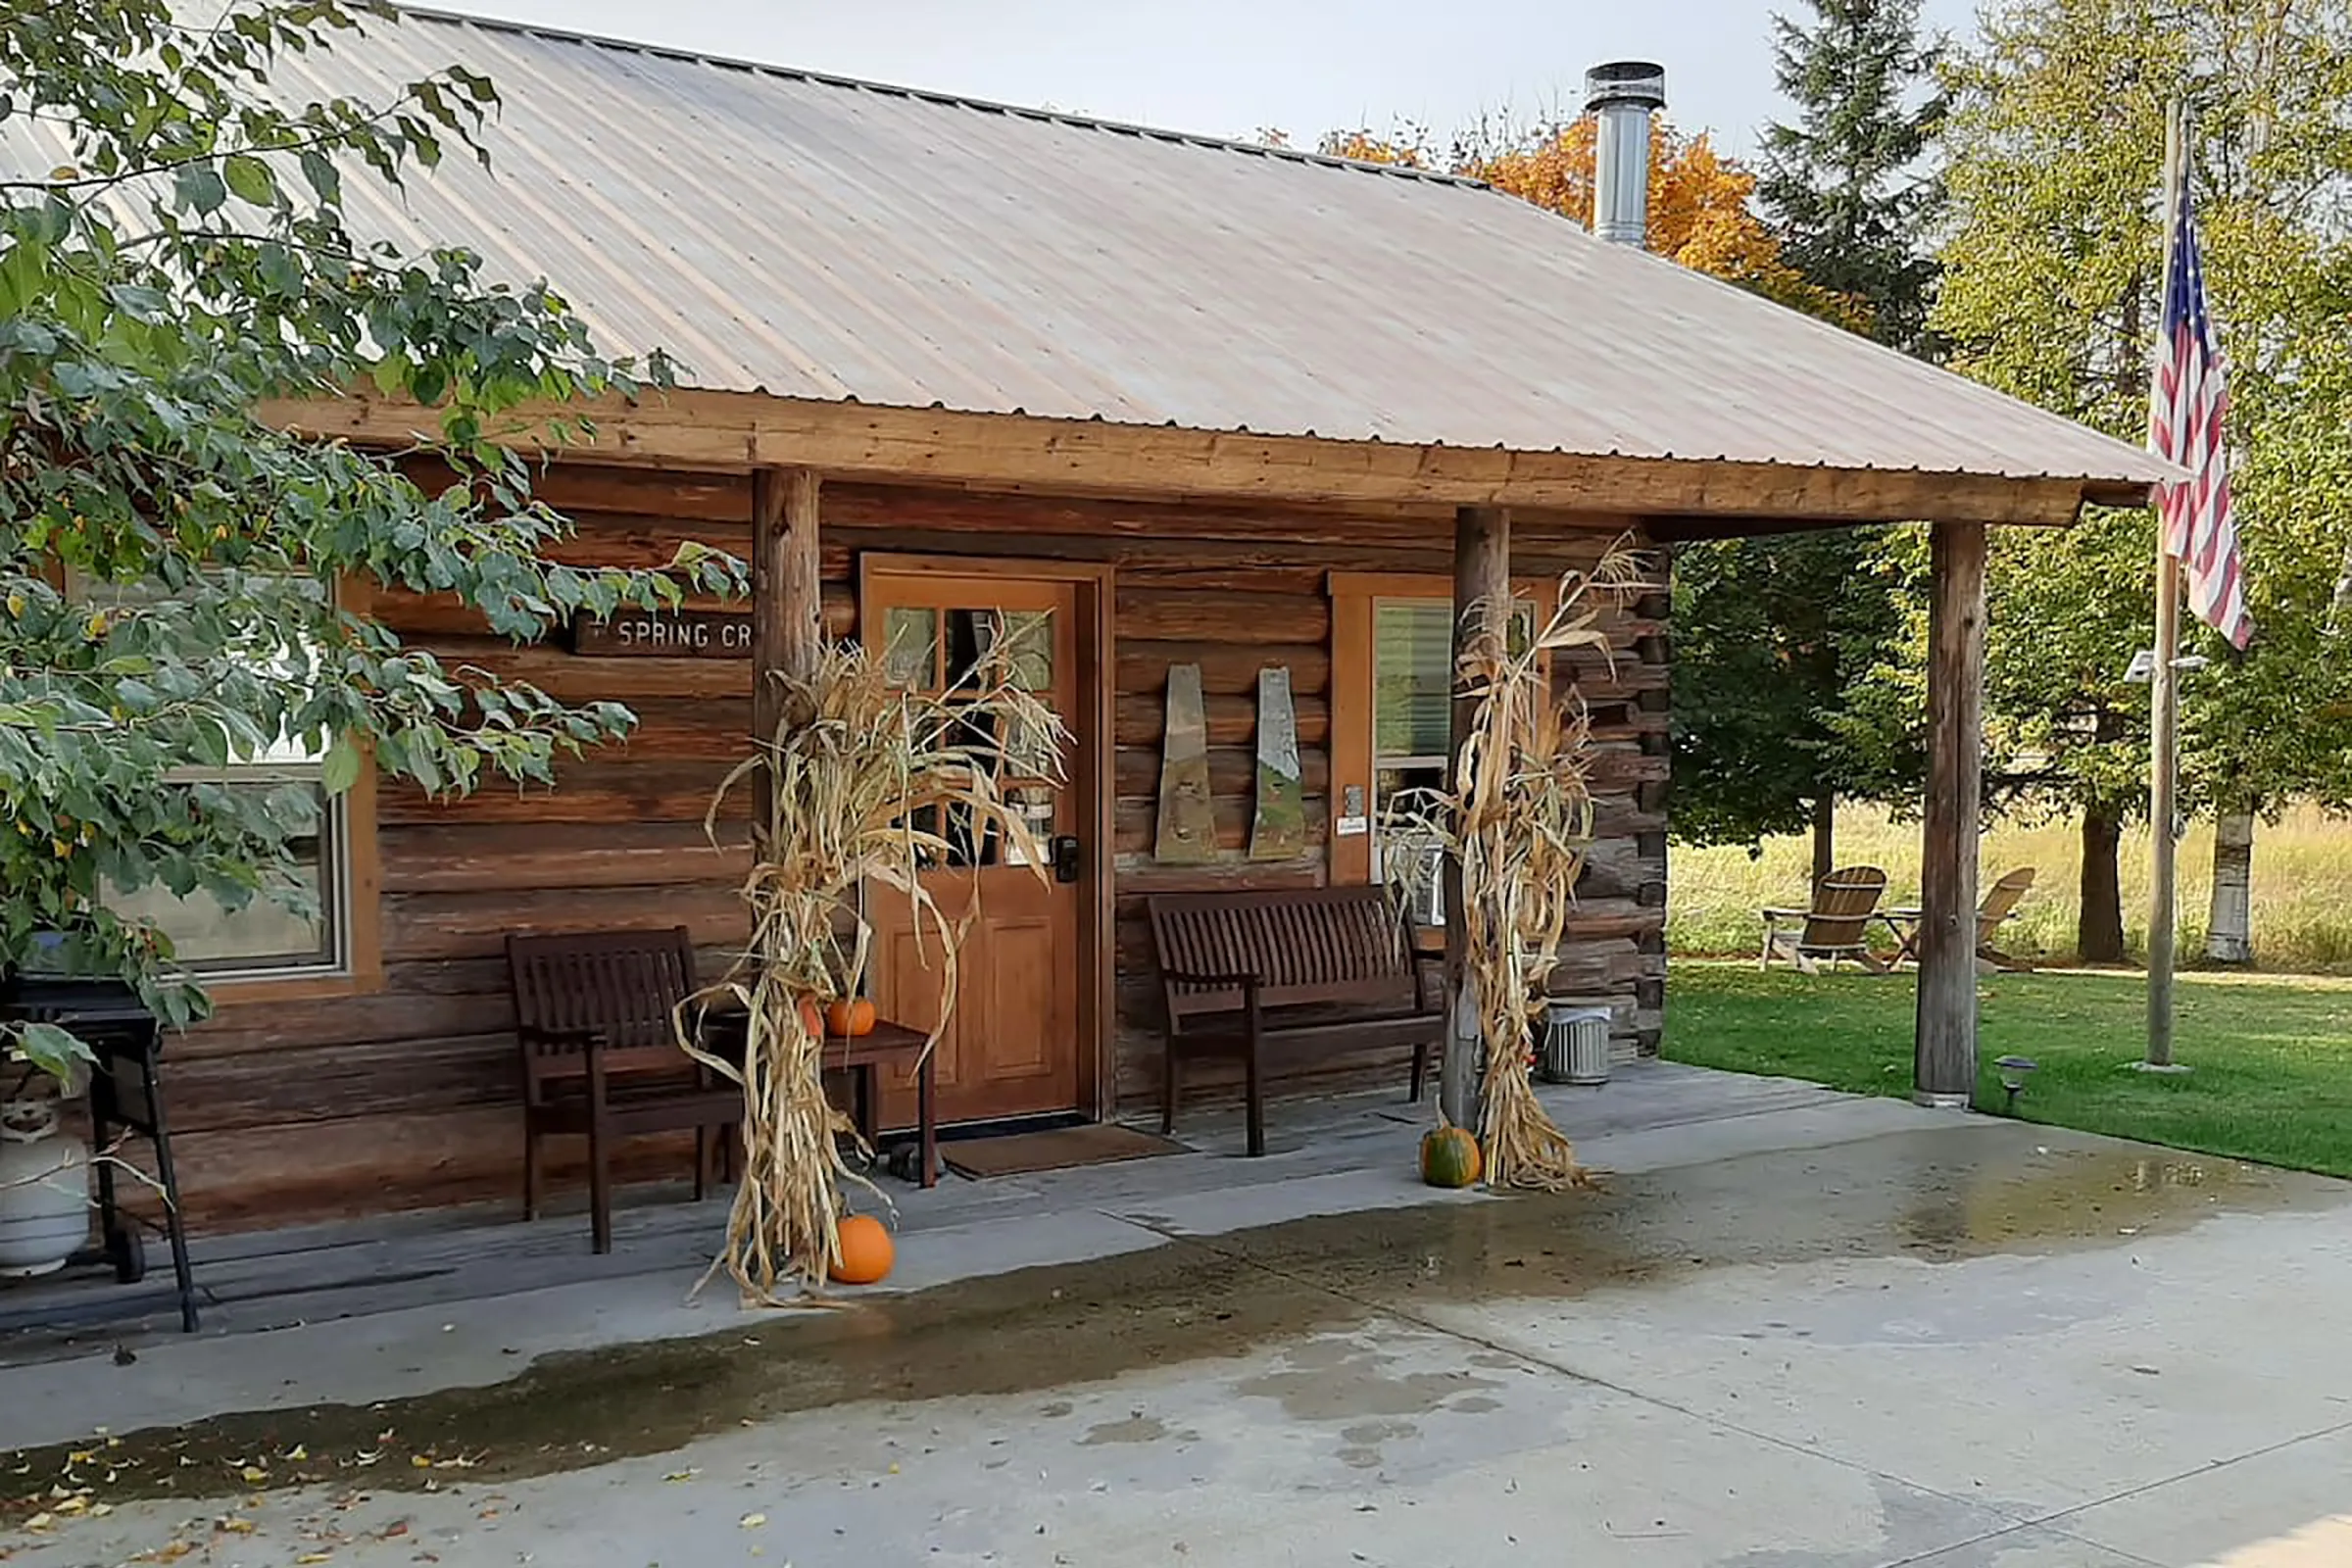 A cabin with pumpkins next to the front door and an American flag hanging from a pole to the left of the entrance to the cabin.